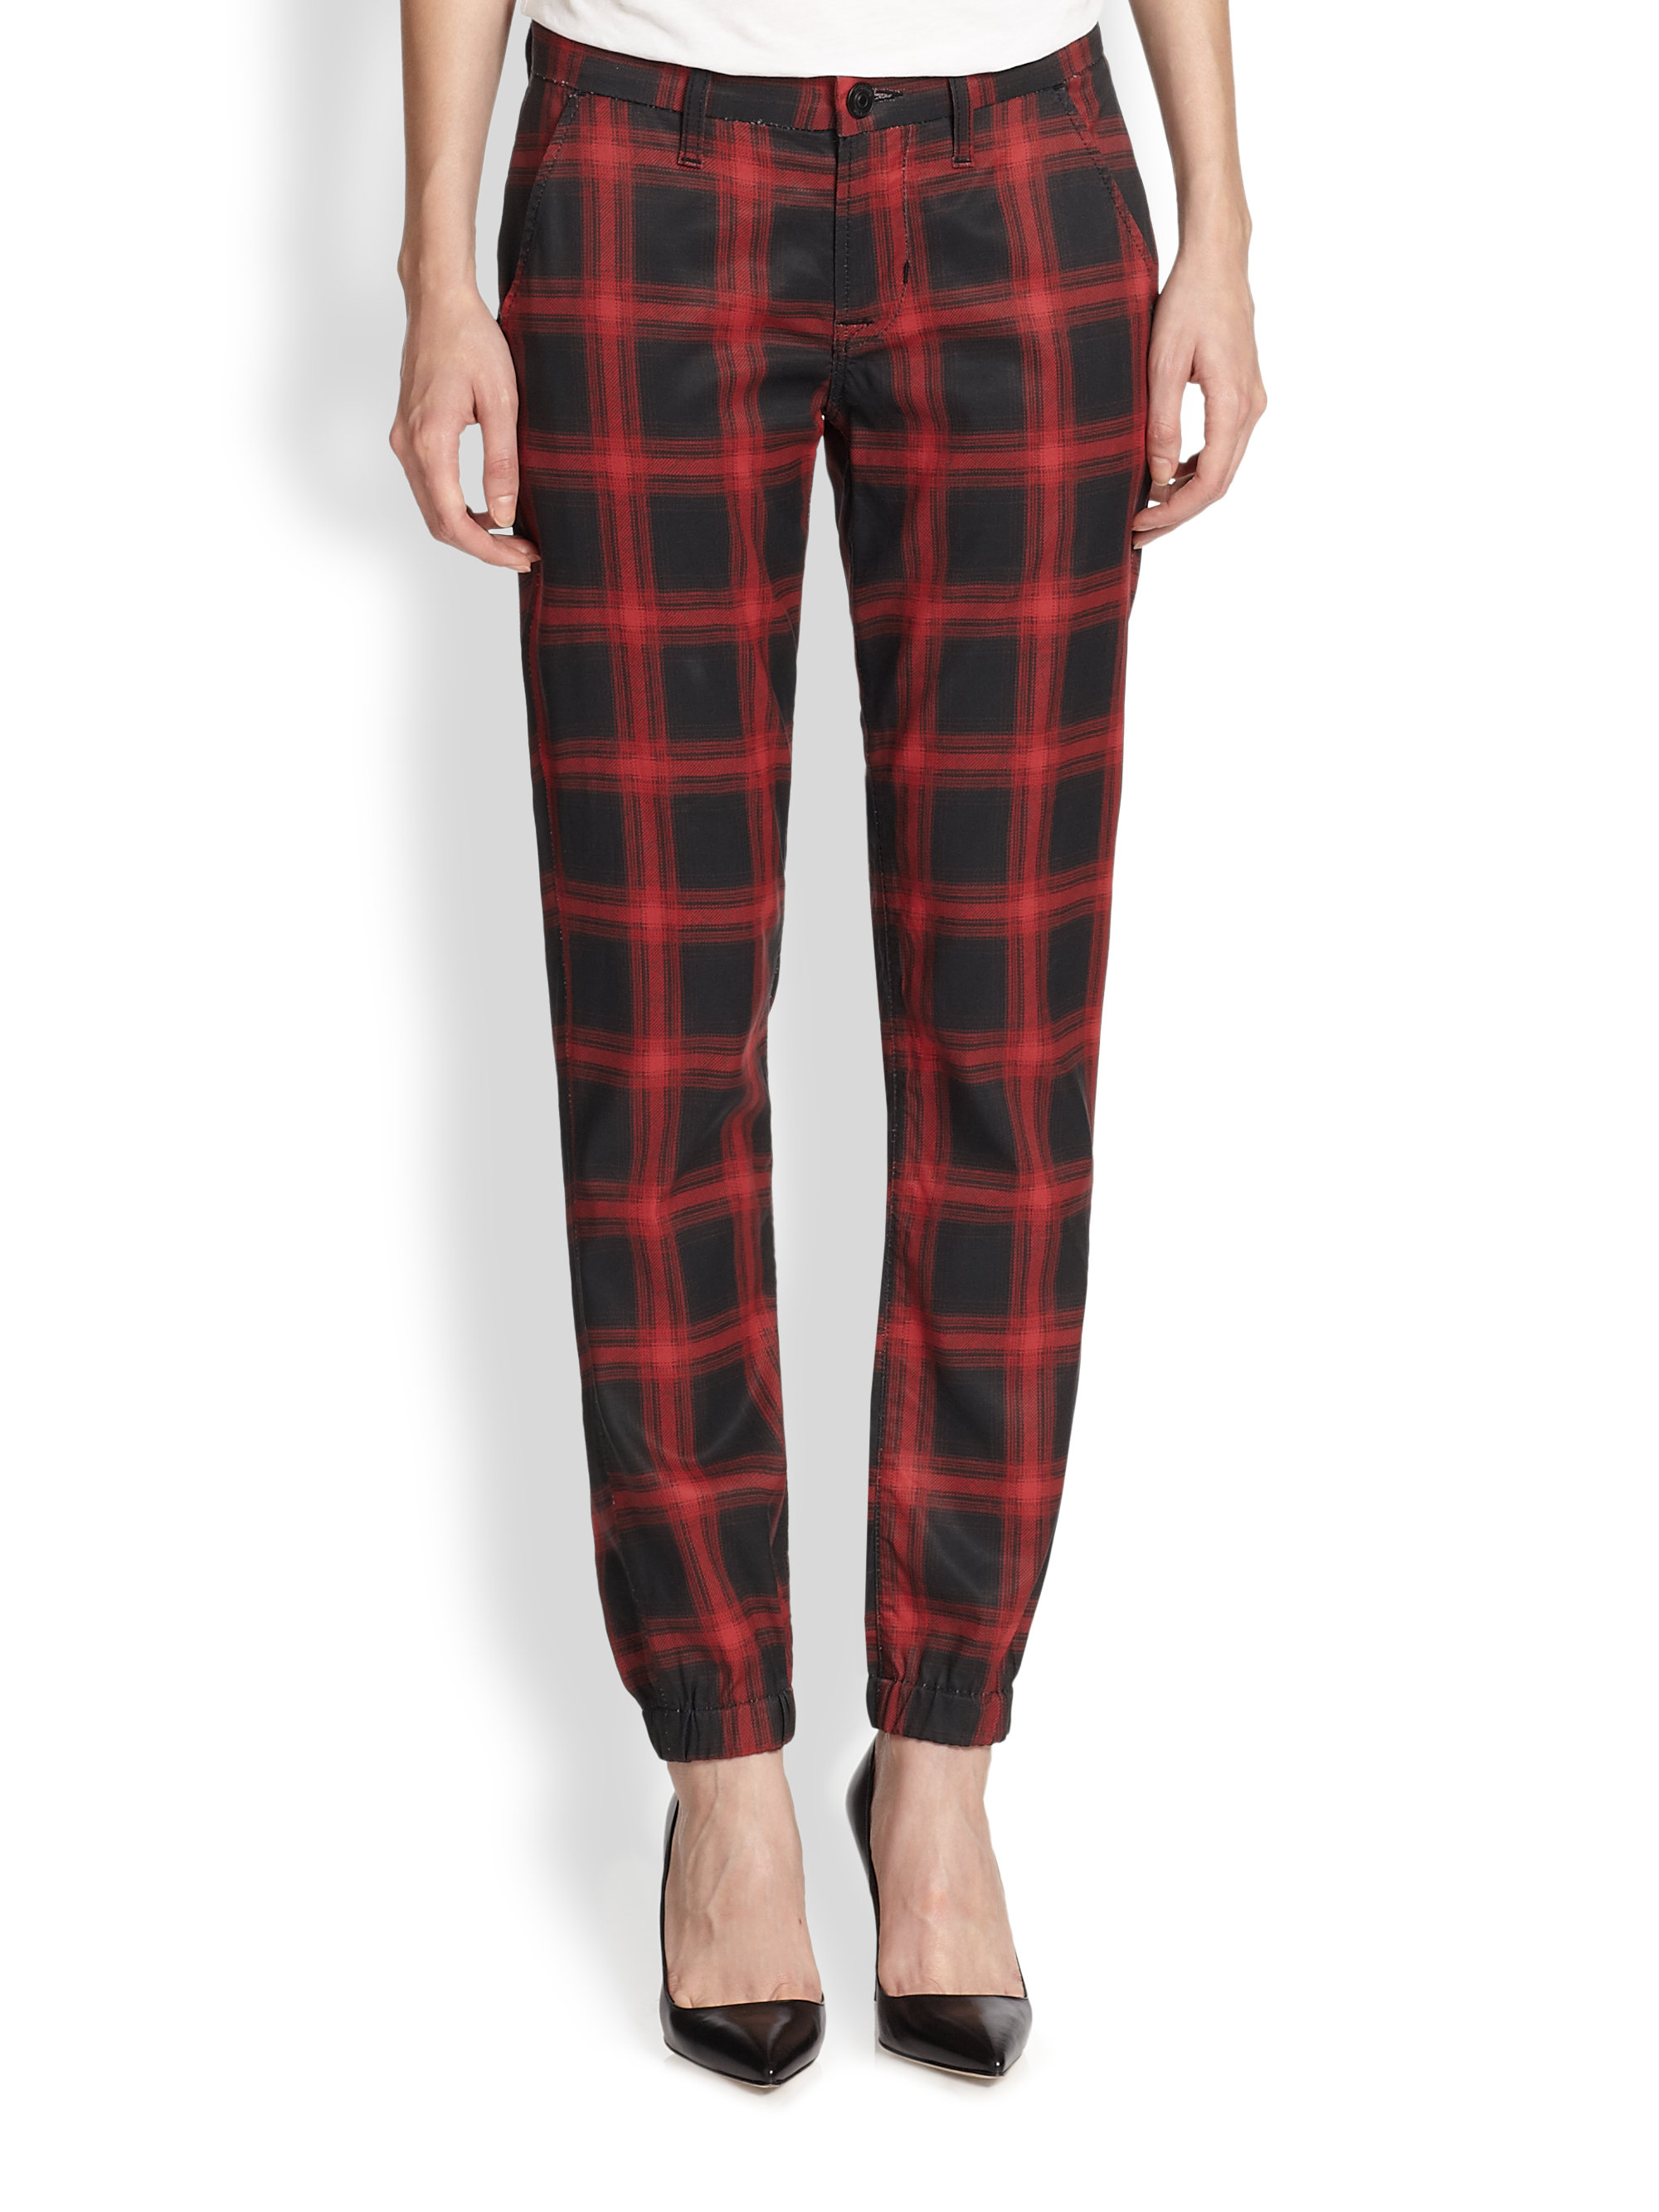 Several types of Plaid Pants For Men – Telegraph